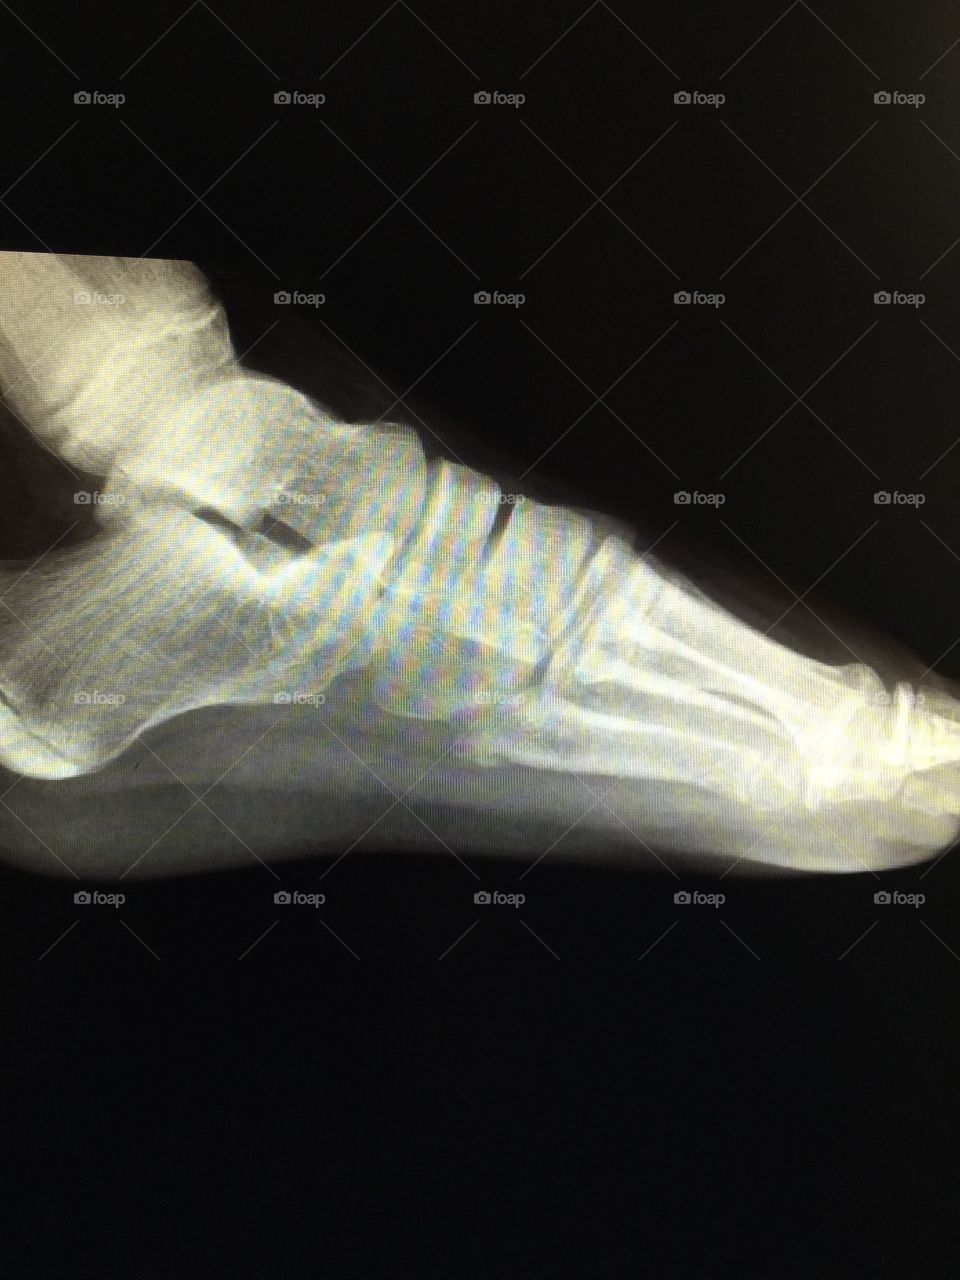 X-Ray of a Foot